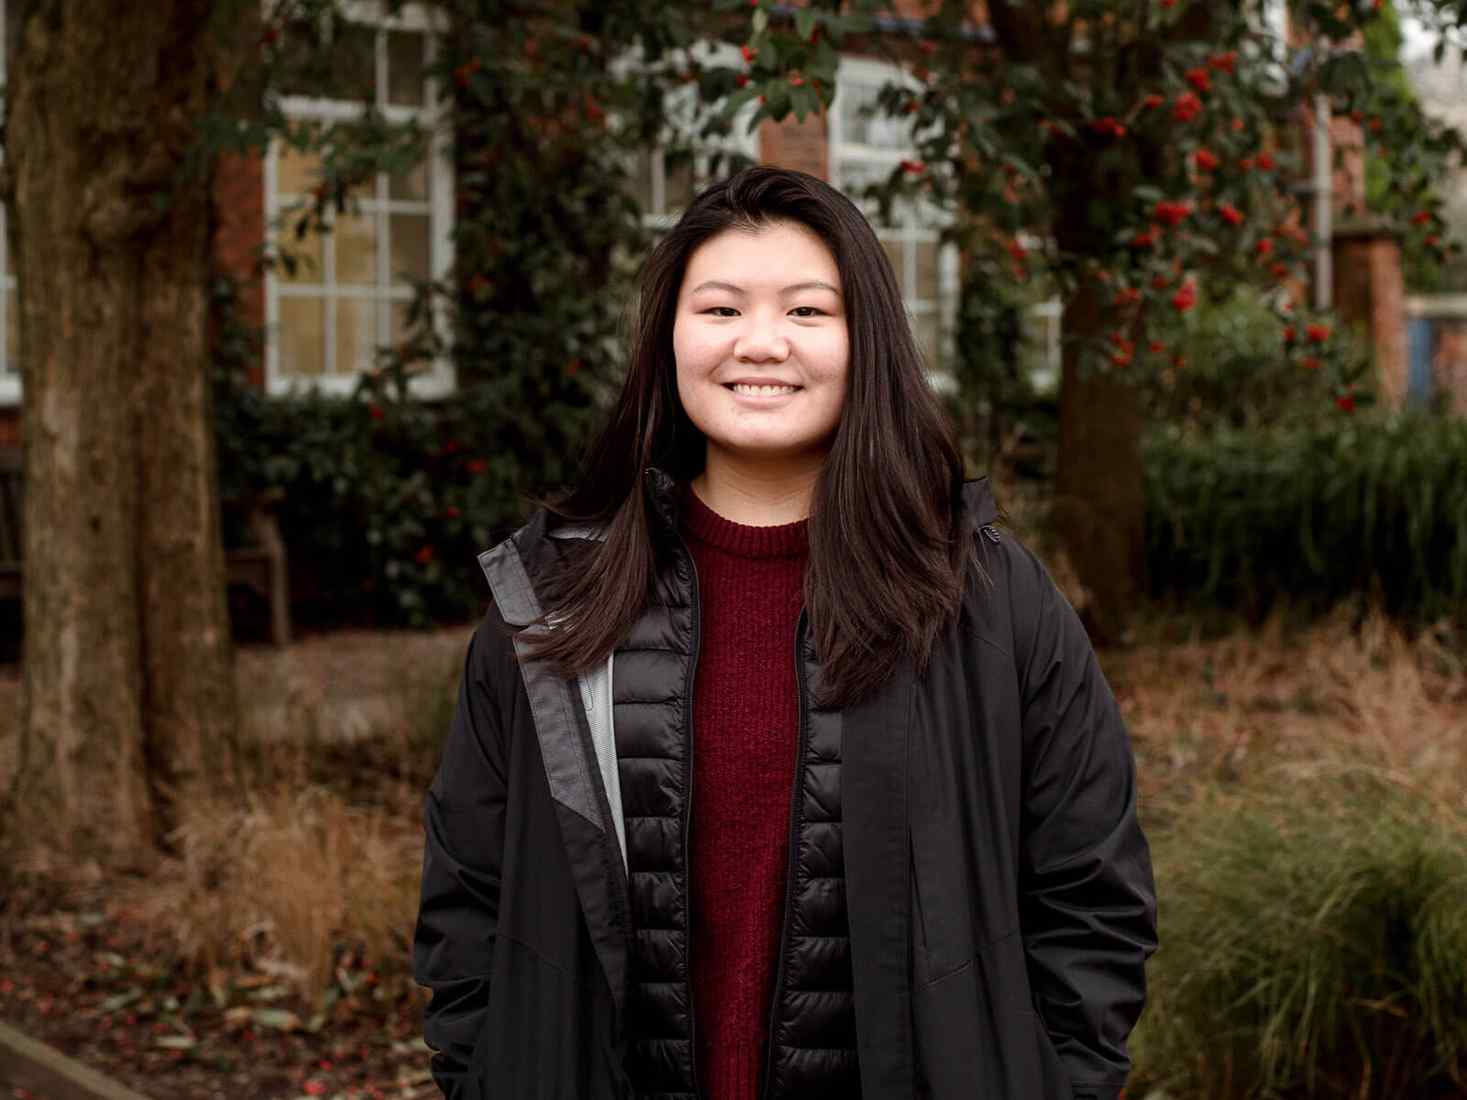 Student outside wearing coat and smiling 